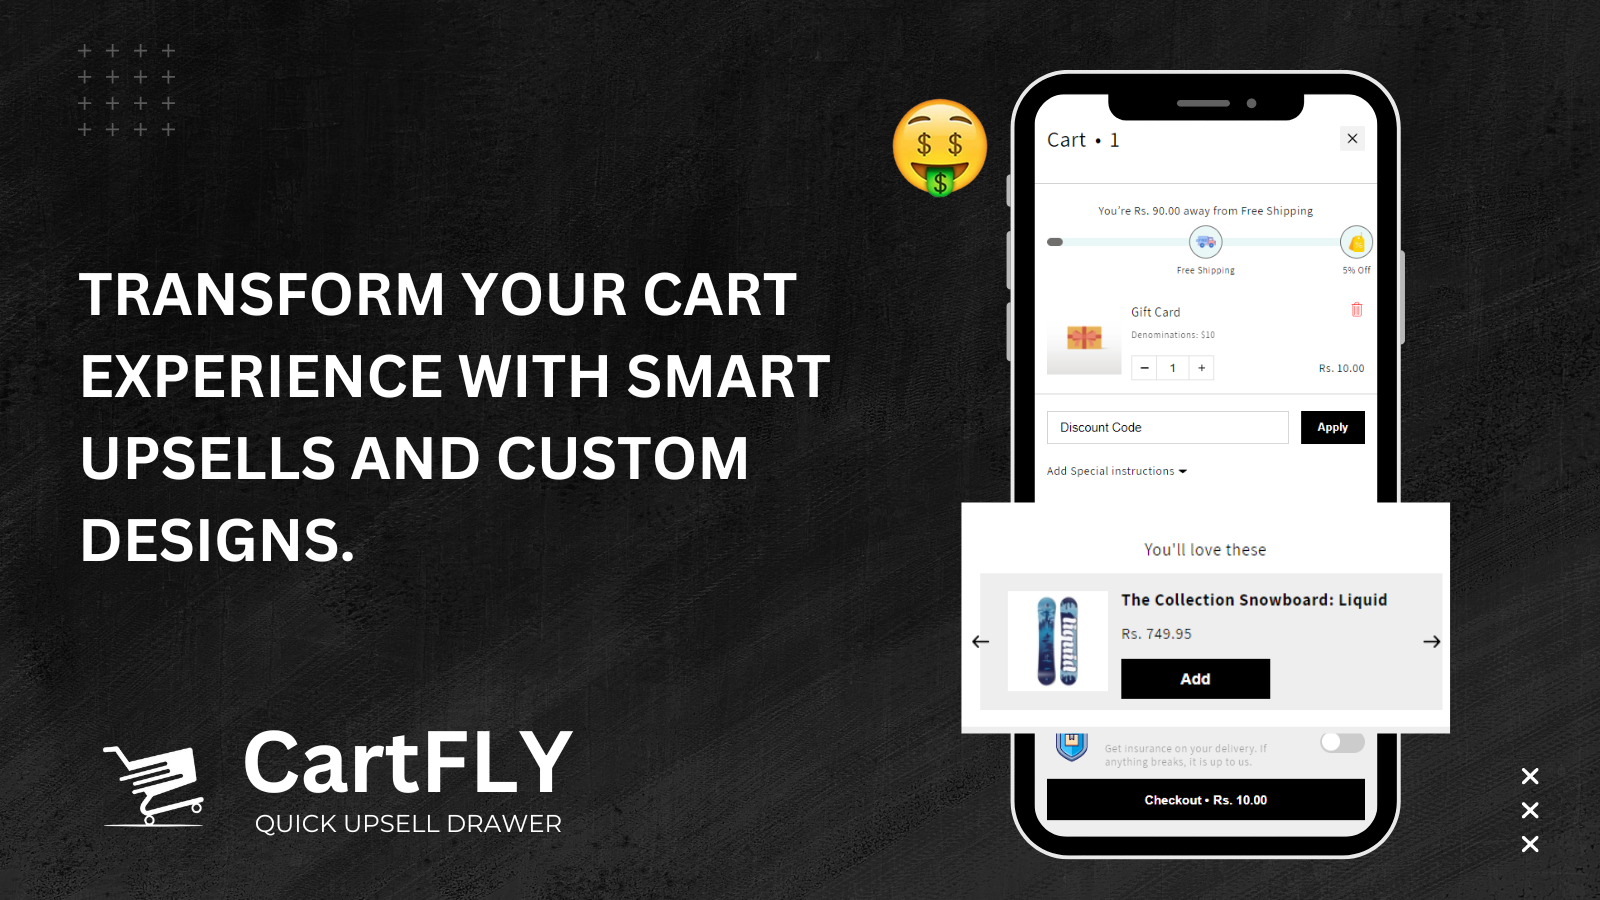 Featured image of cartfly app